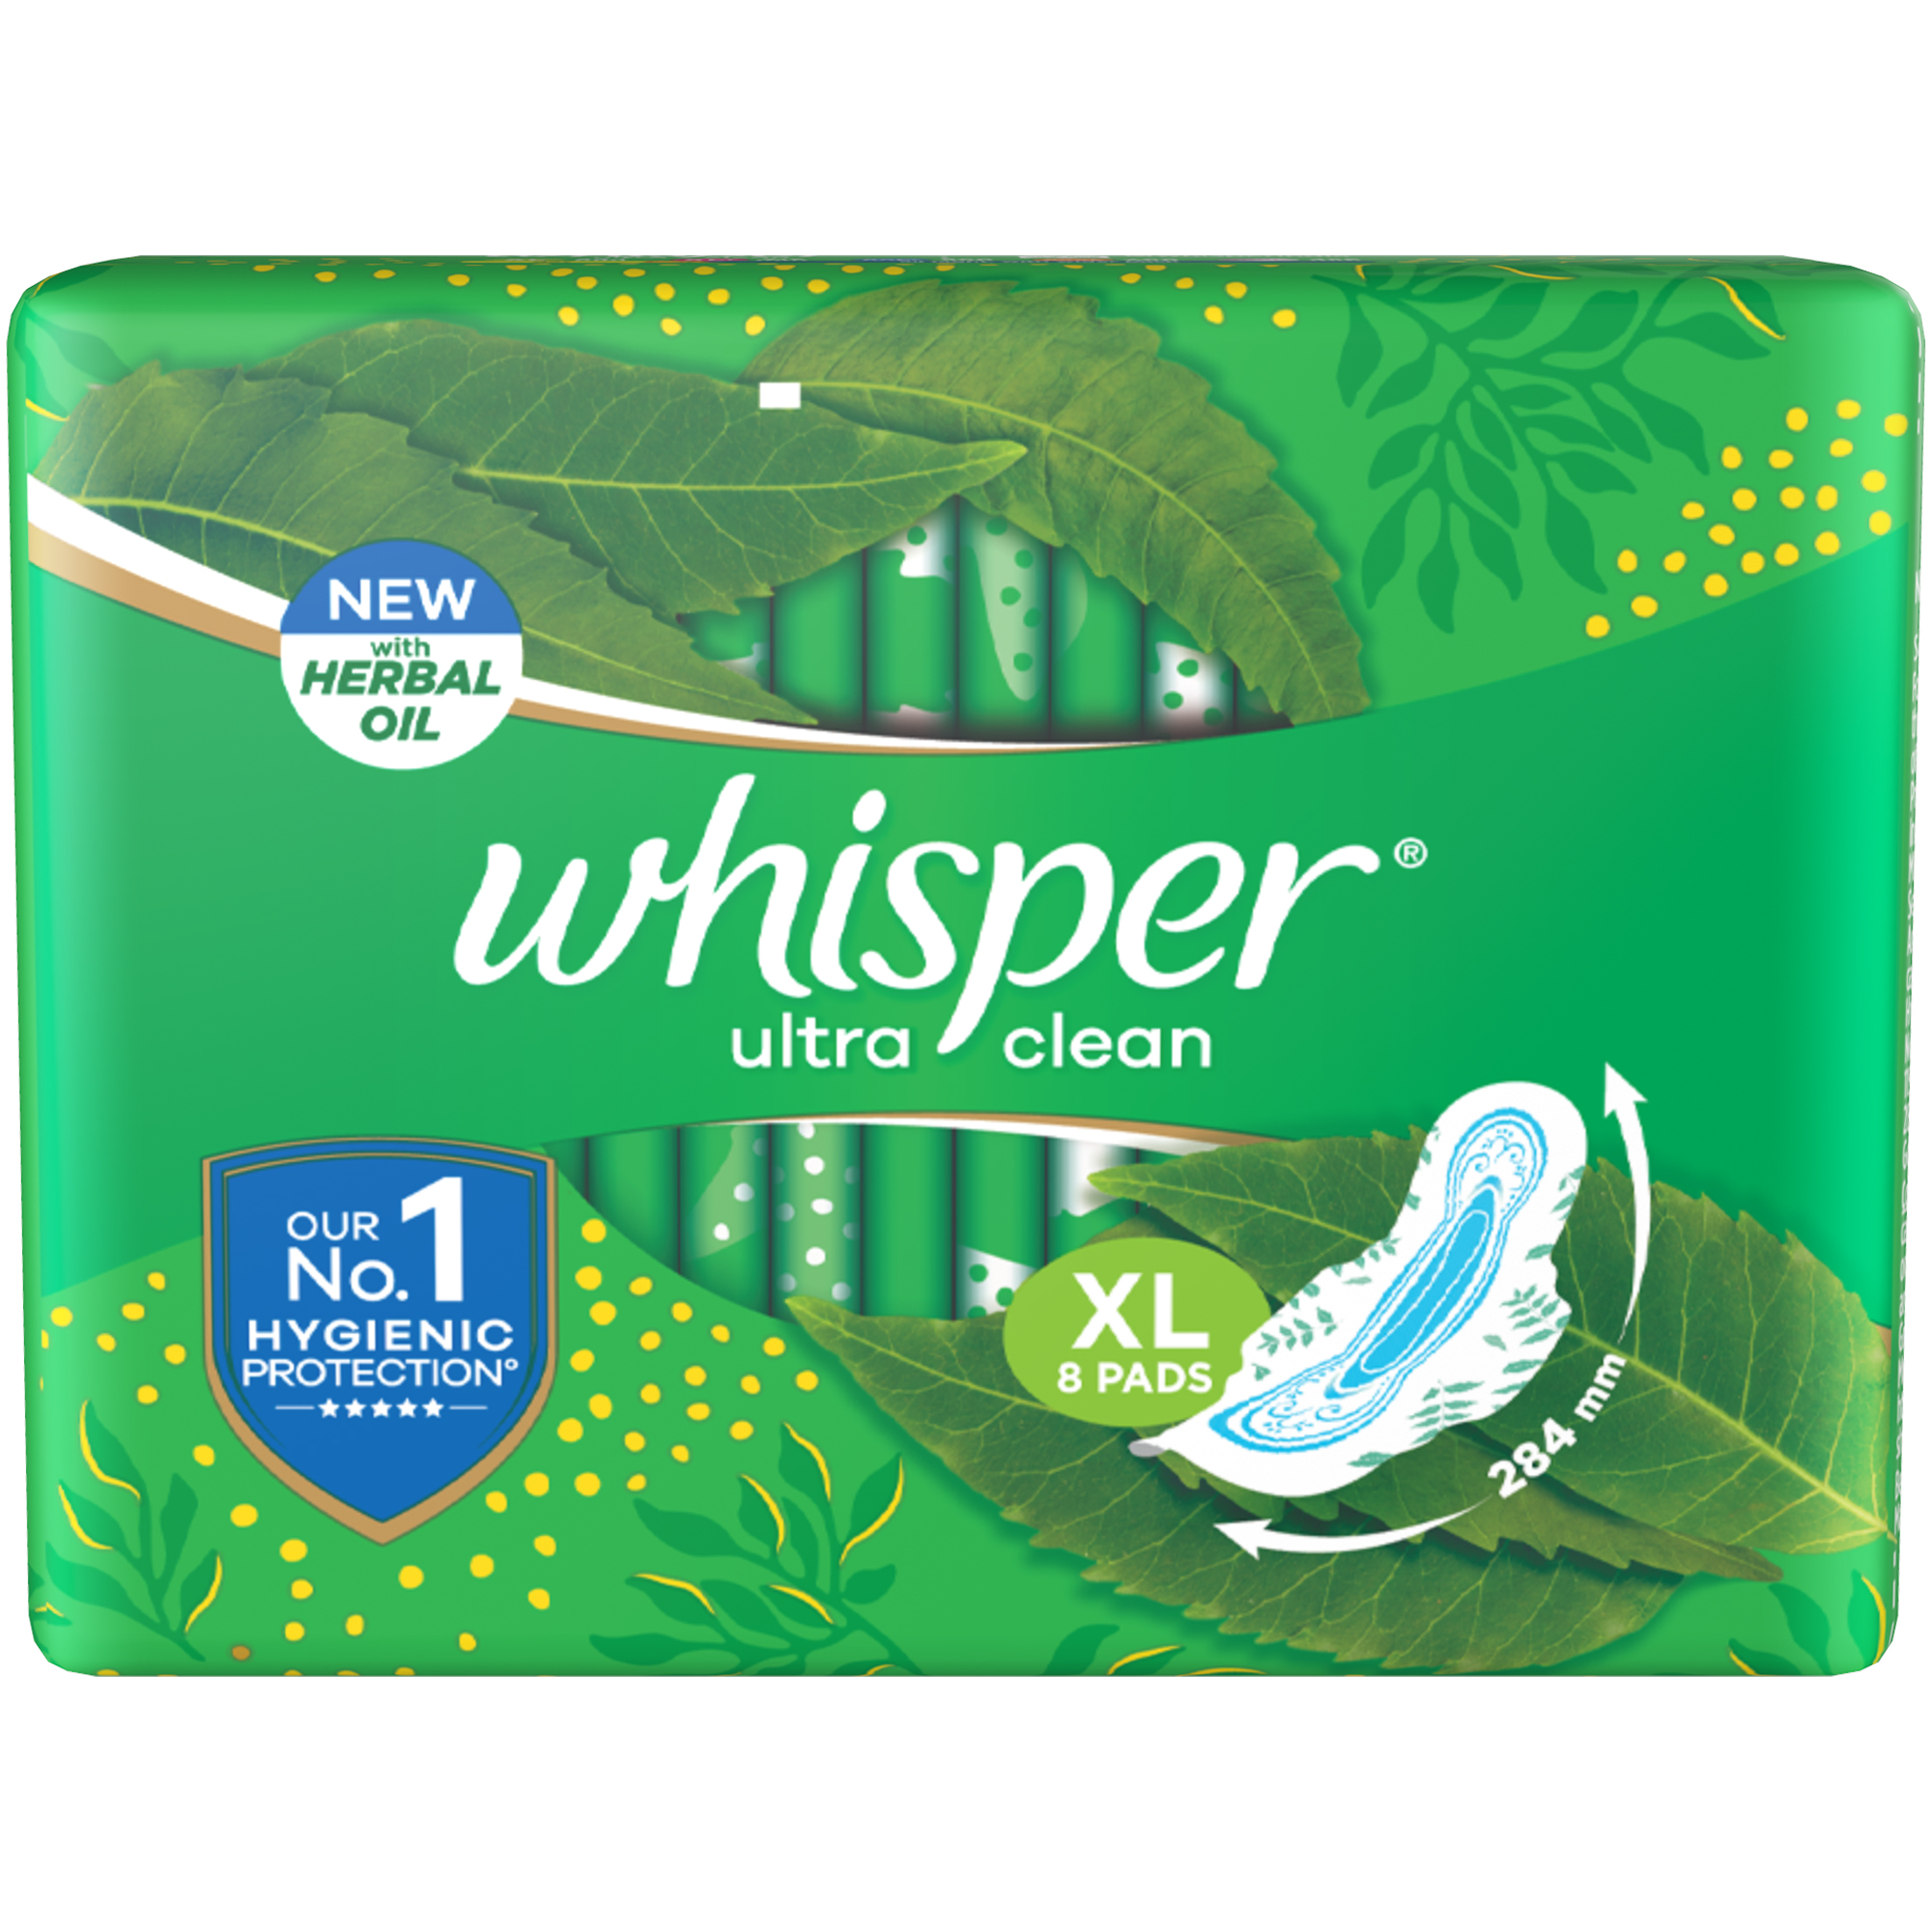 Buy Whisper Bindazzz Night Thin XL+ Sanitary Pads for upto 0% Leaks-40%  Longer with Dry top sheet,45 Pad Online